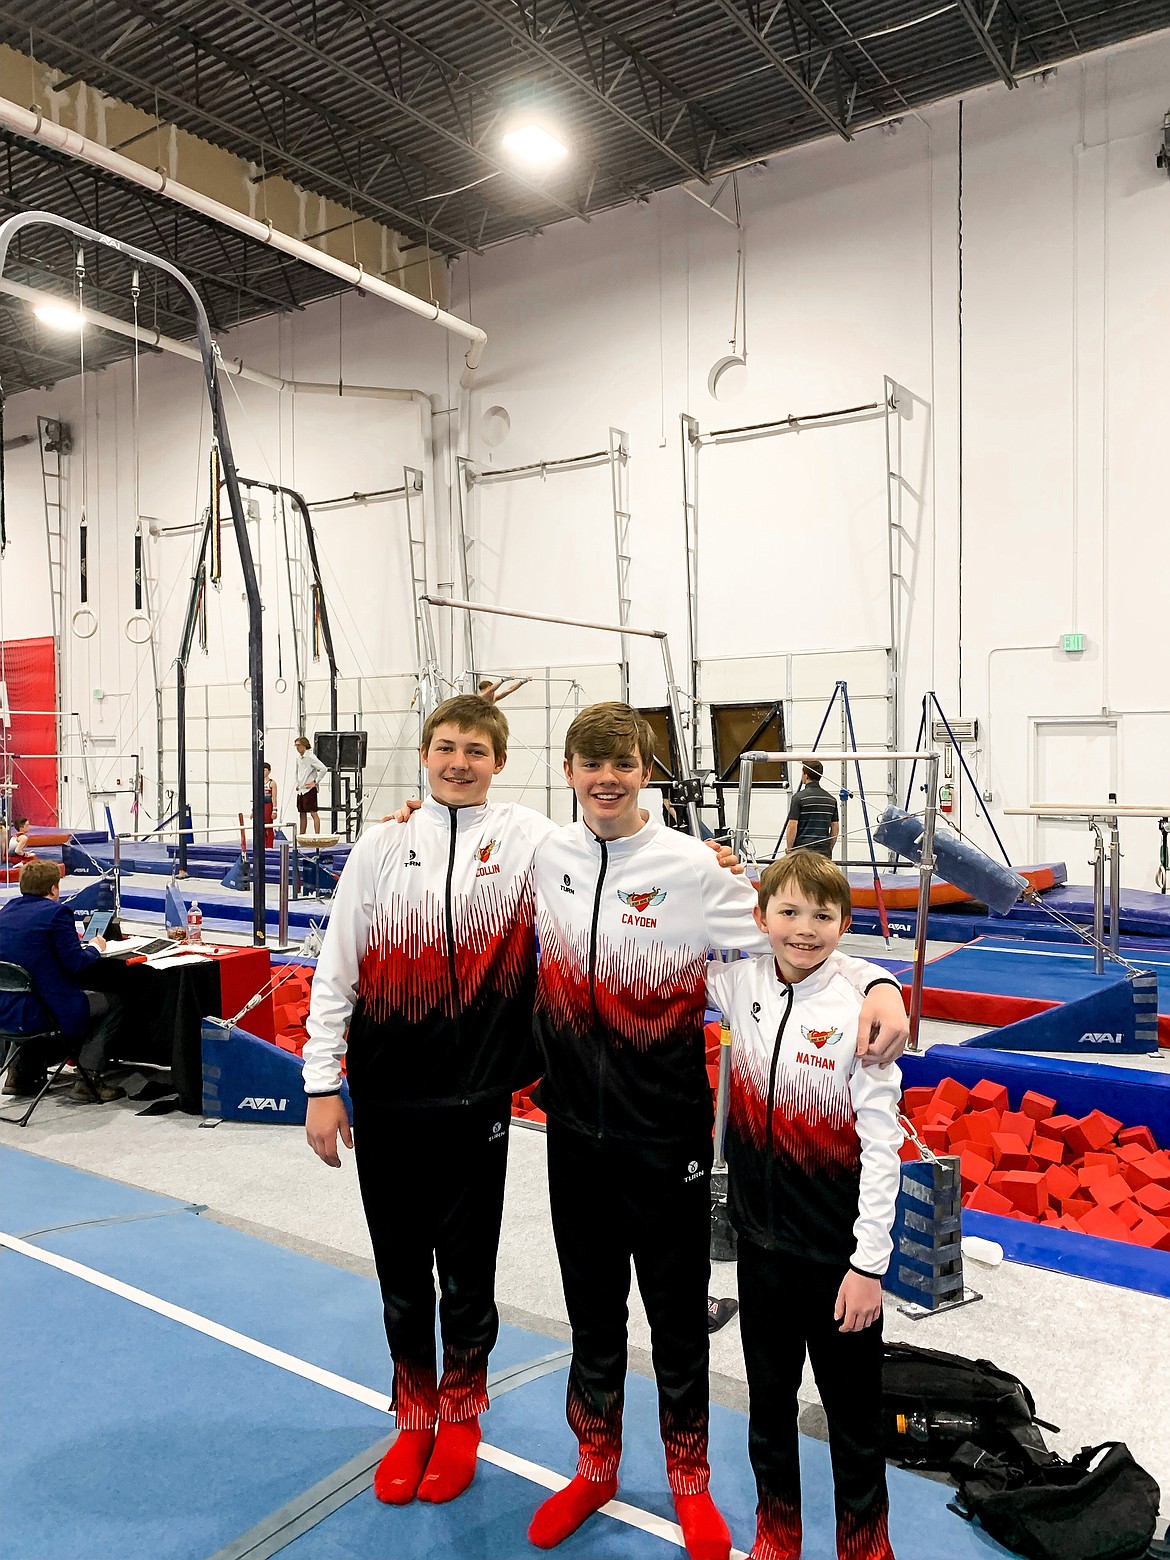 Courtesy photo
Avant Coeur boys Level 7s and 5s at the Idaho state gymnastics championships in Moscow. From left are Collin Scott, Cayden Ptashkin and Nathan Cohen.